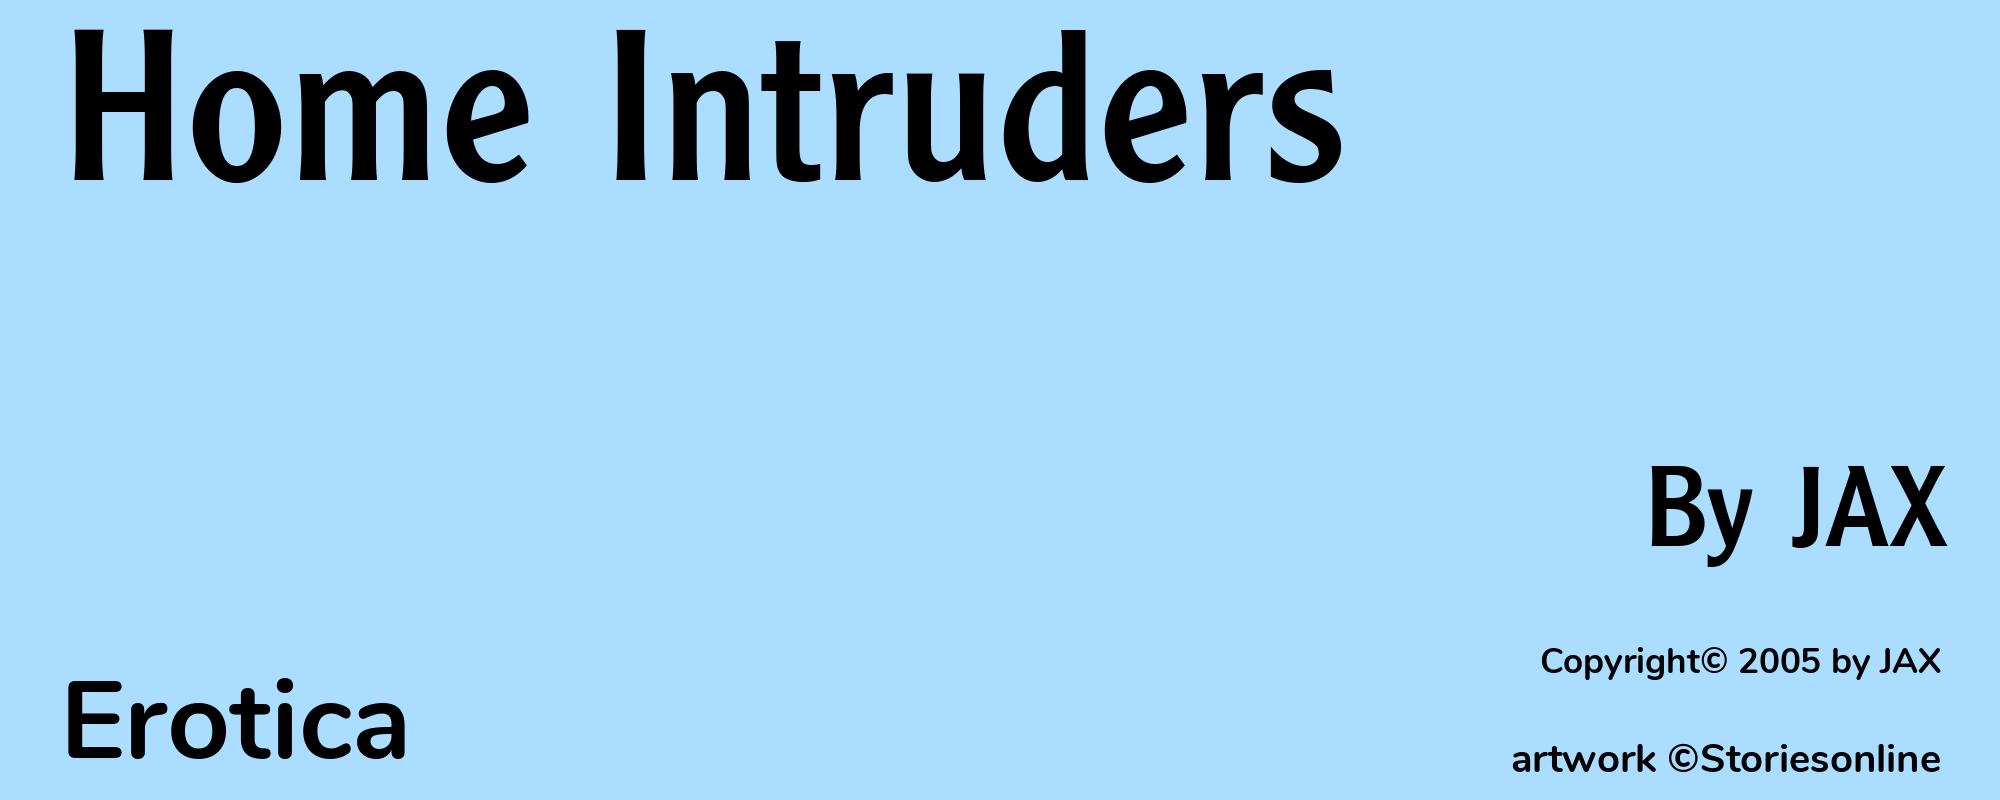 Home Intruders - Cover